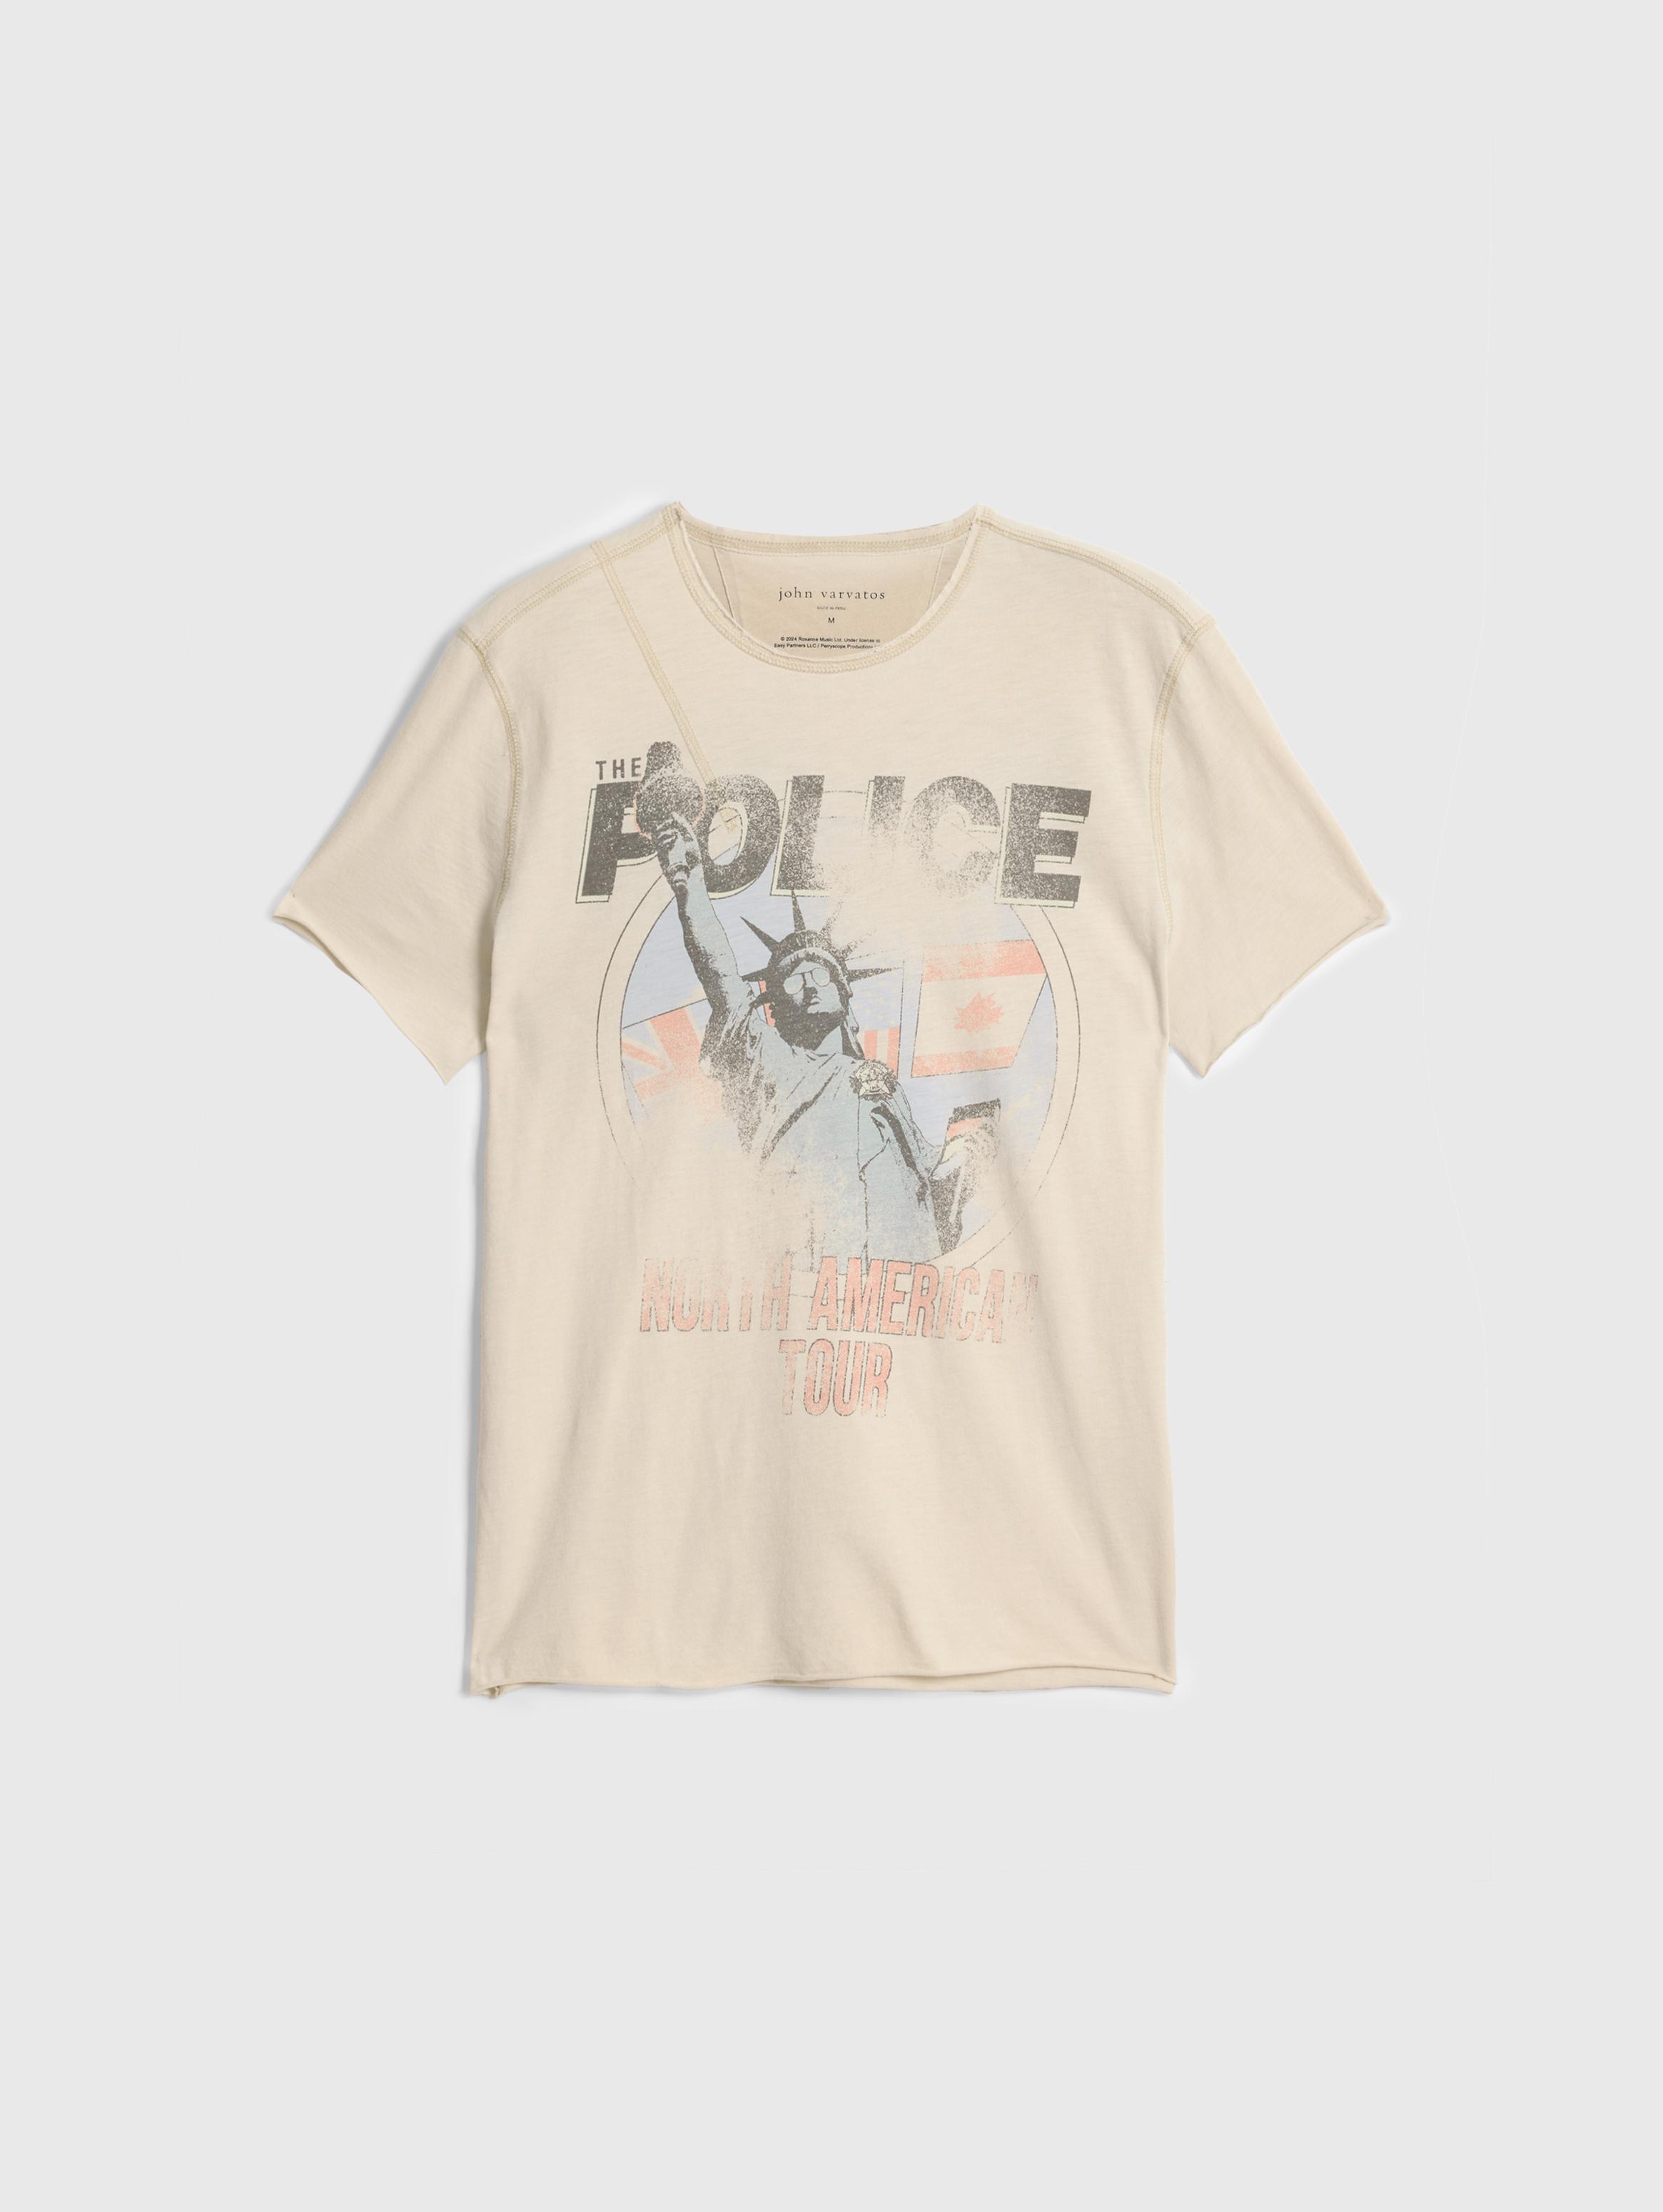 THE POLICE TOUR TEE image number 1